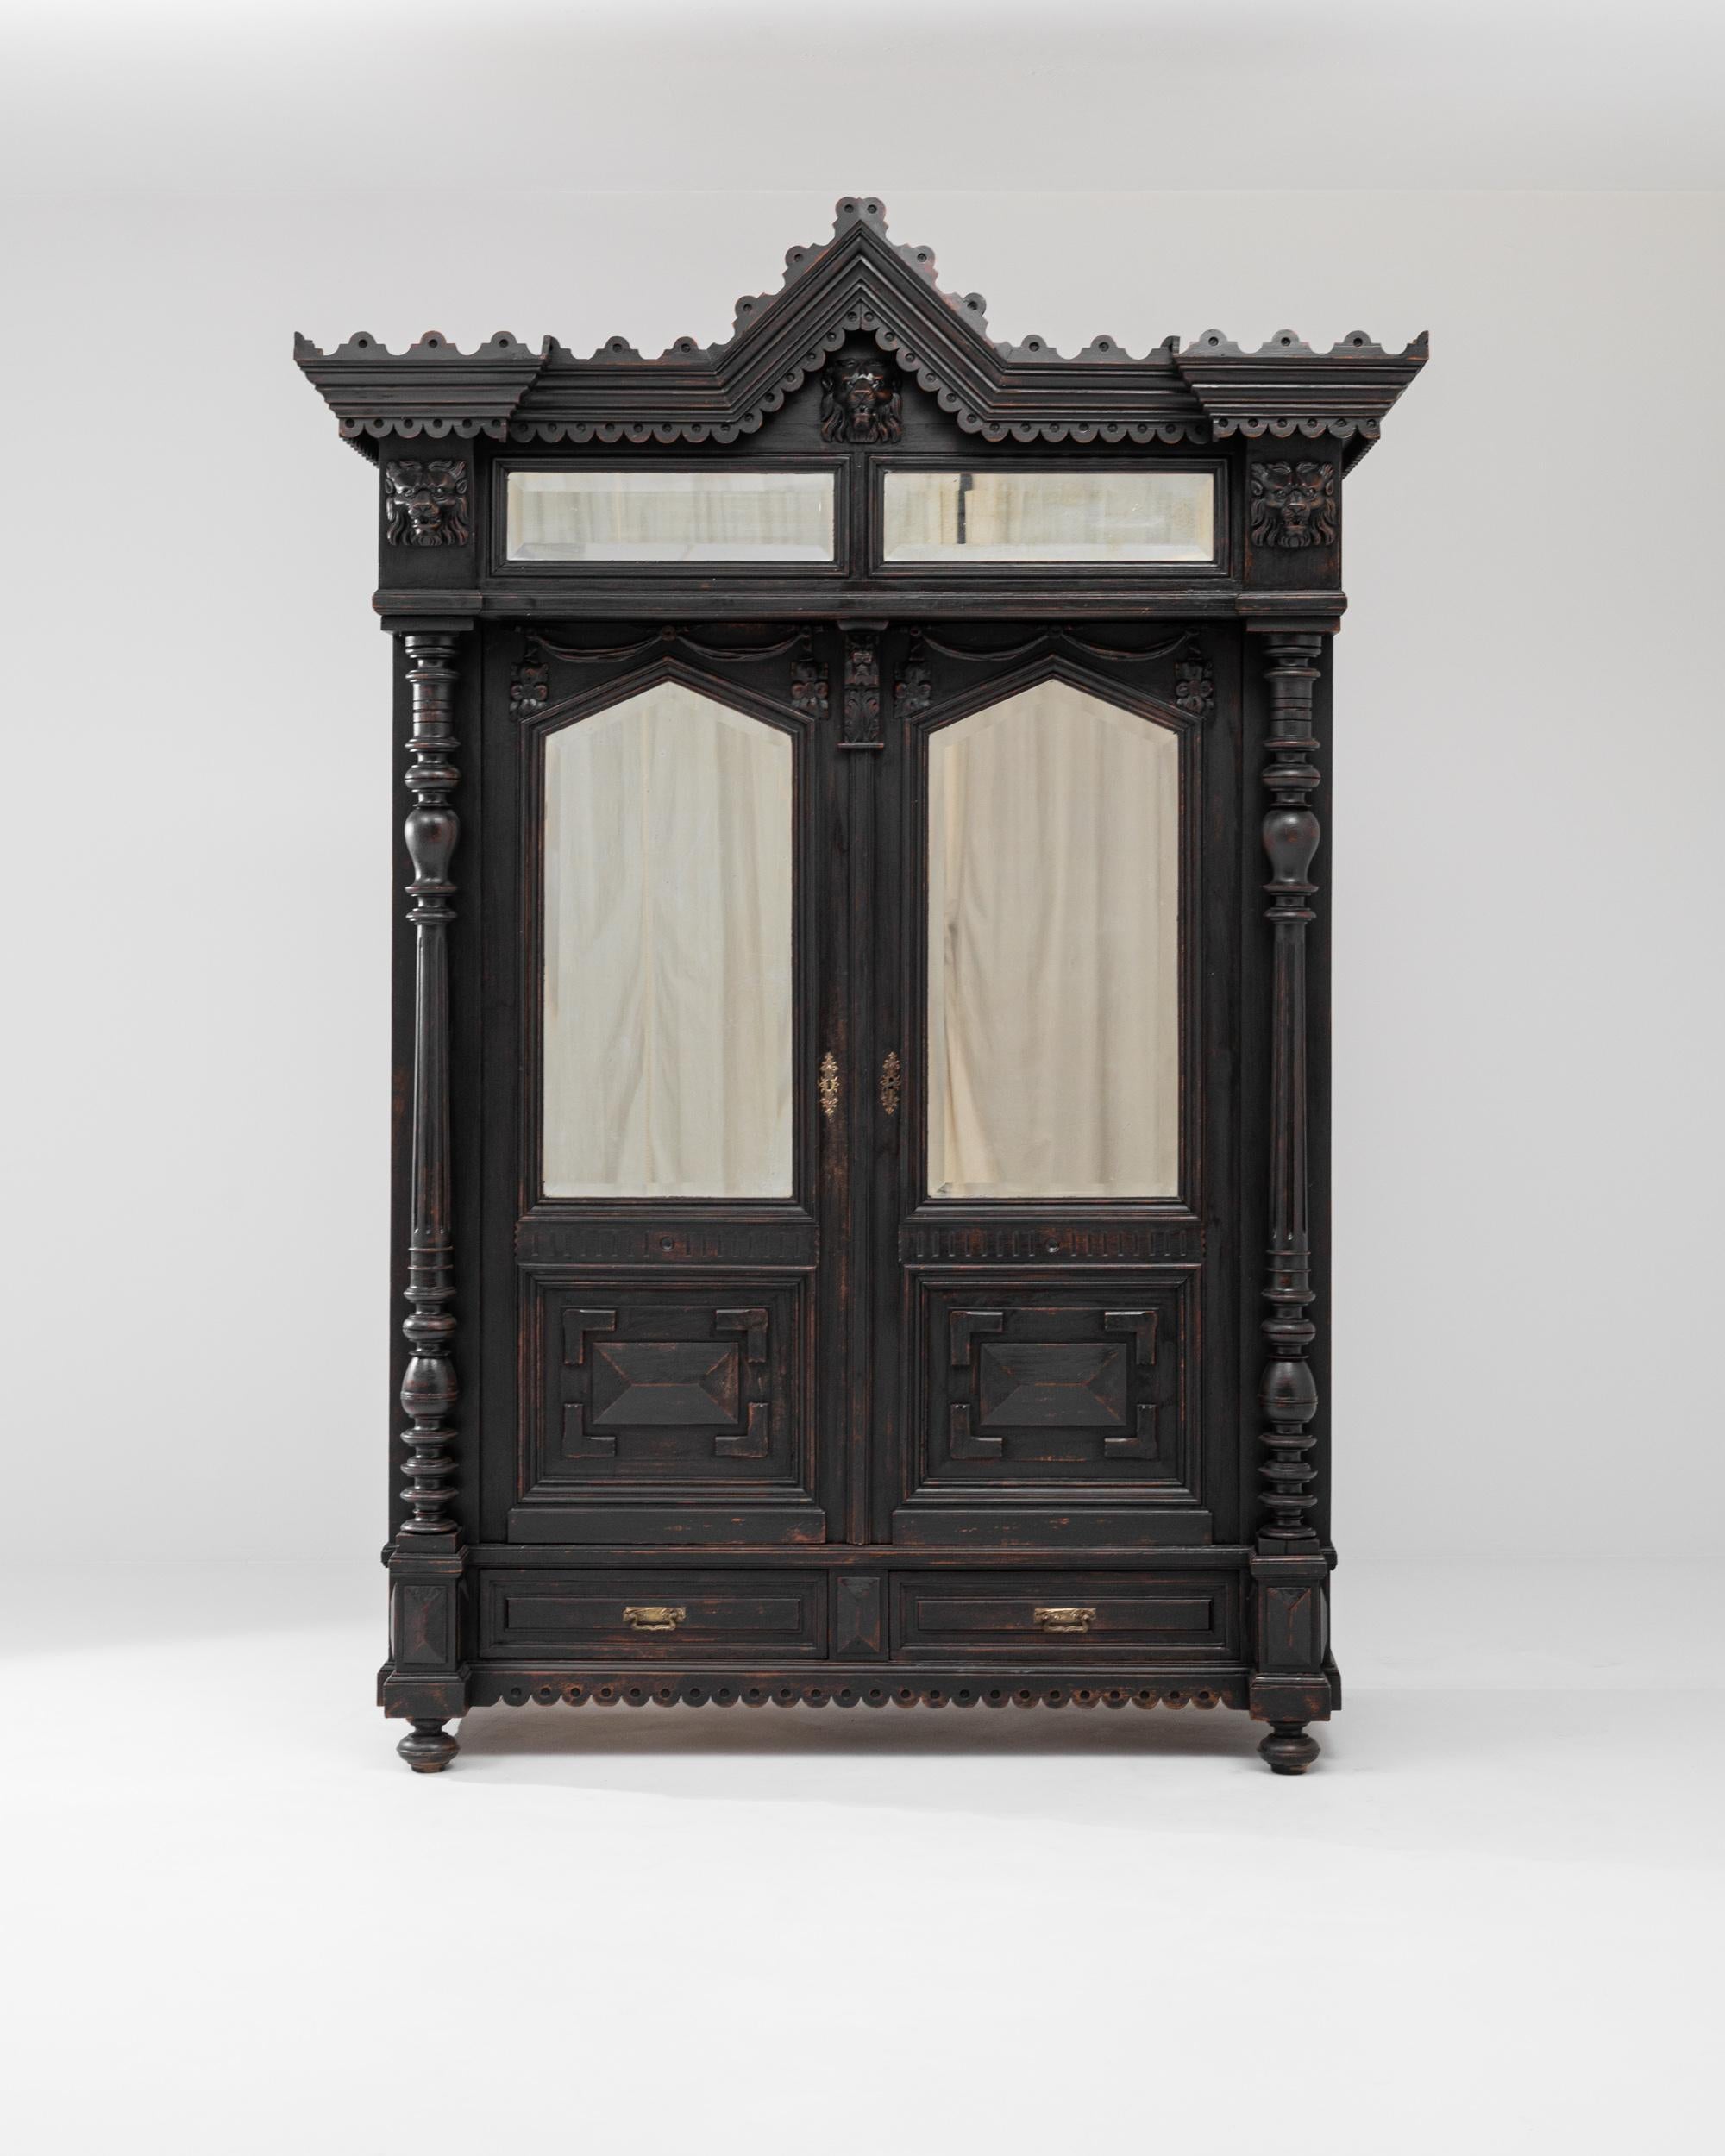 Rich with ornate detail, this beautiful Neo-Renaissance cabinet makes a truly unique period piece. Built in France at the turn of the century, the magnificent case is crowned by a peaked cornice: below, diamond-point moldings, turned columns and